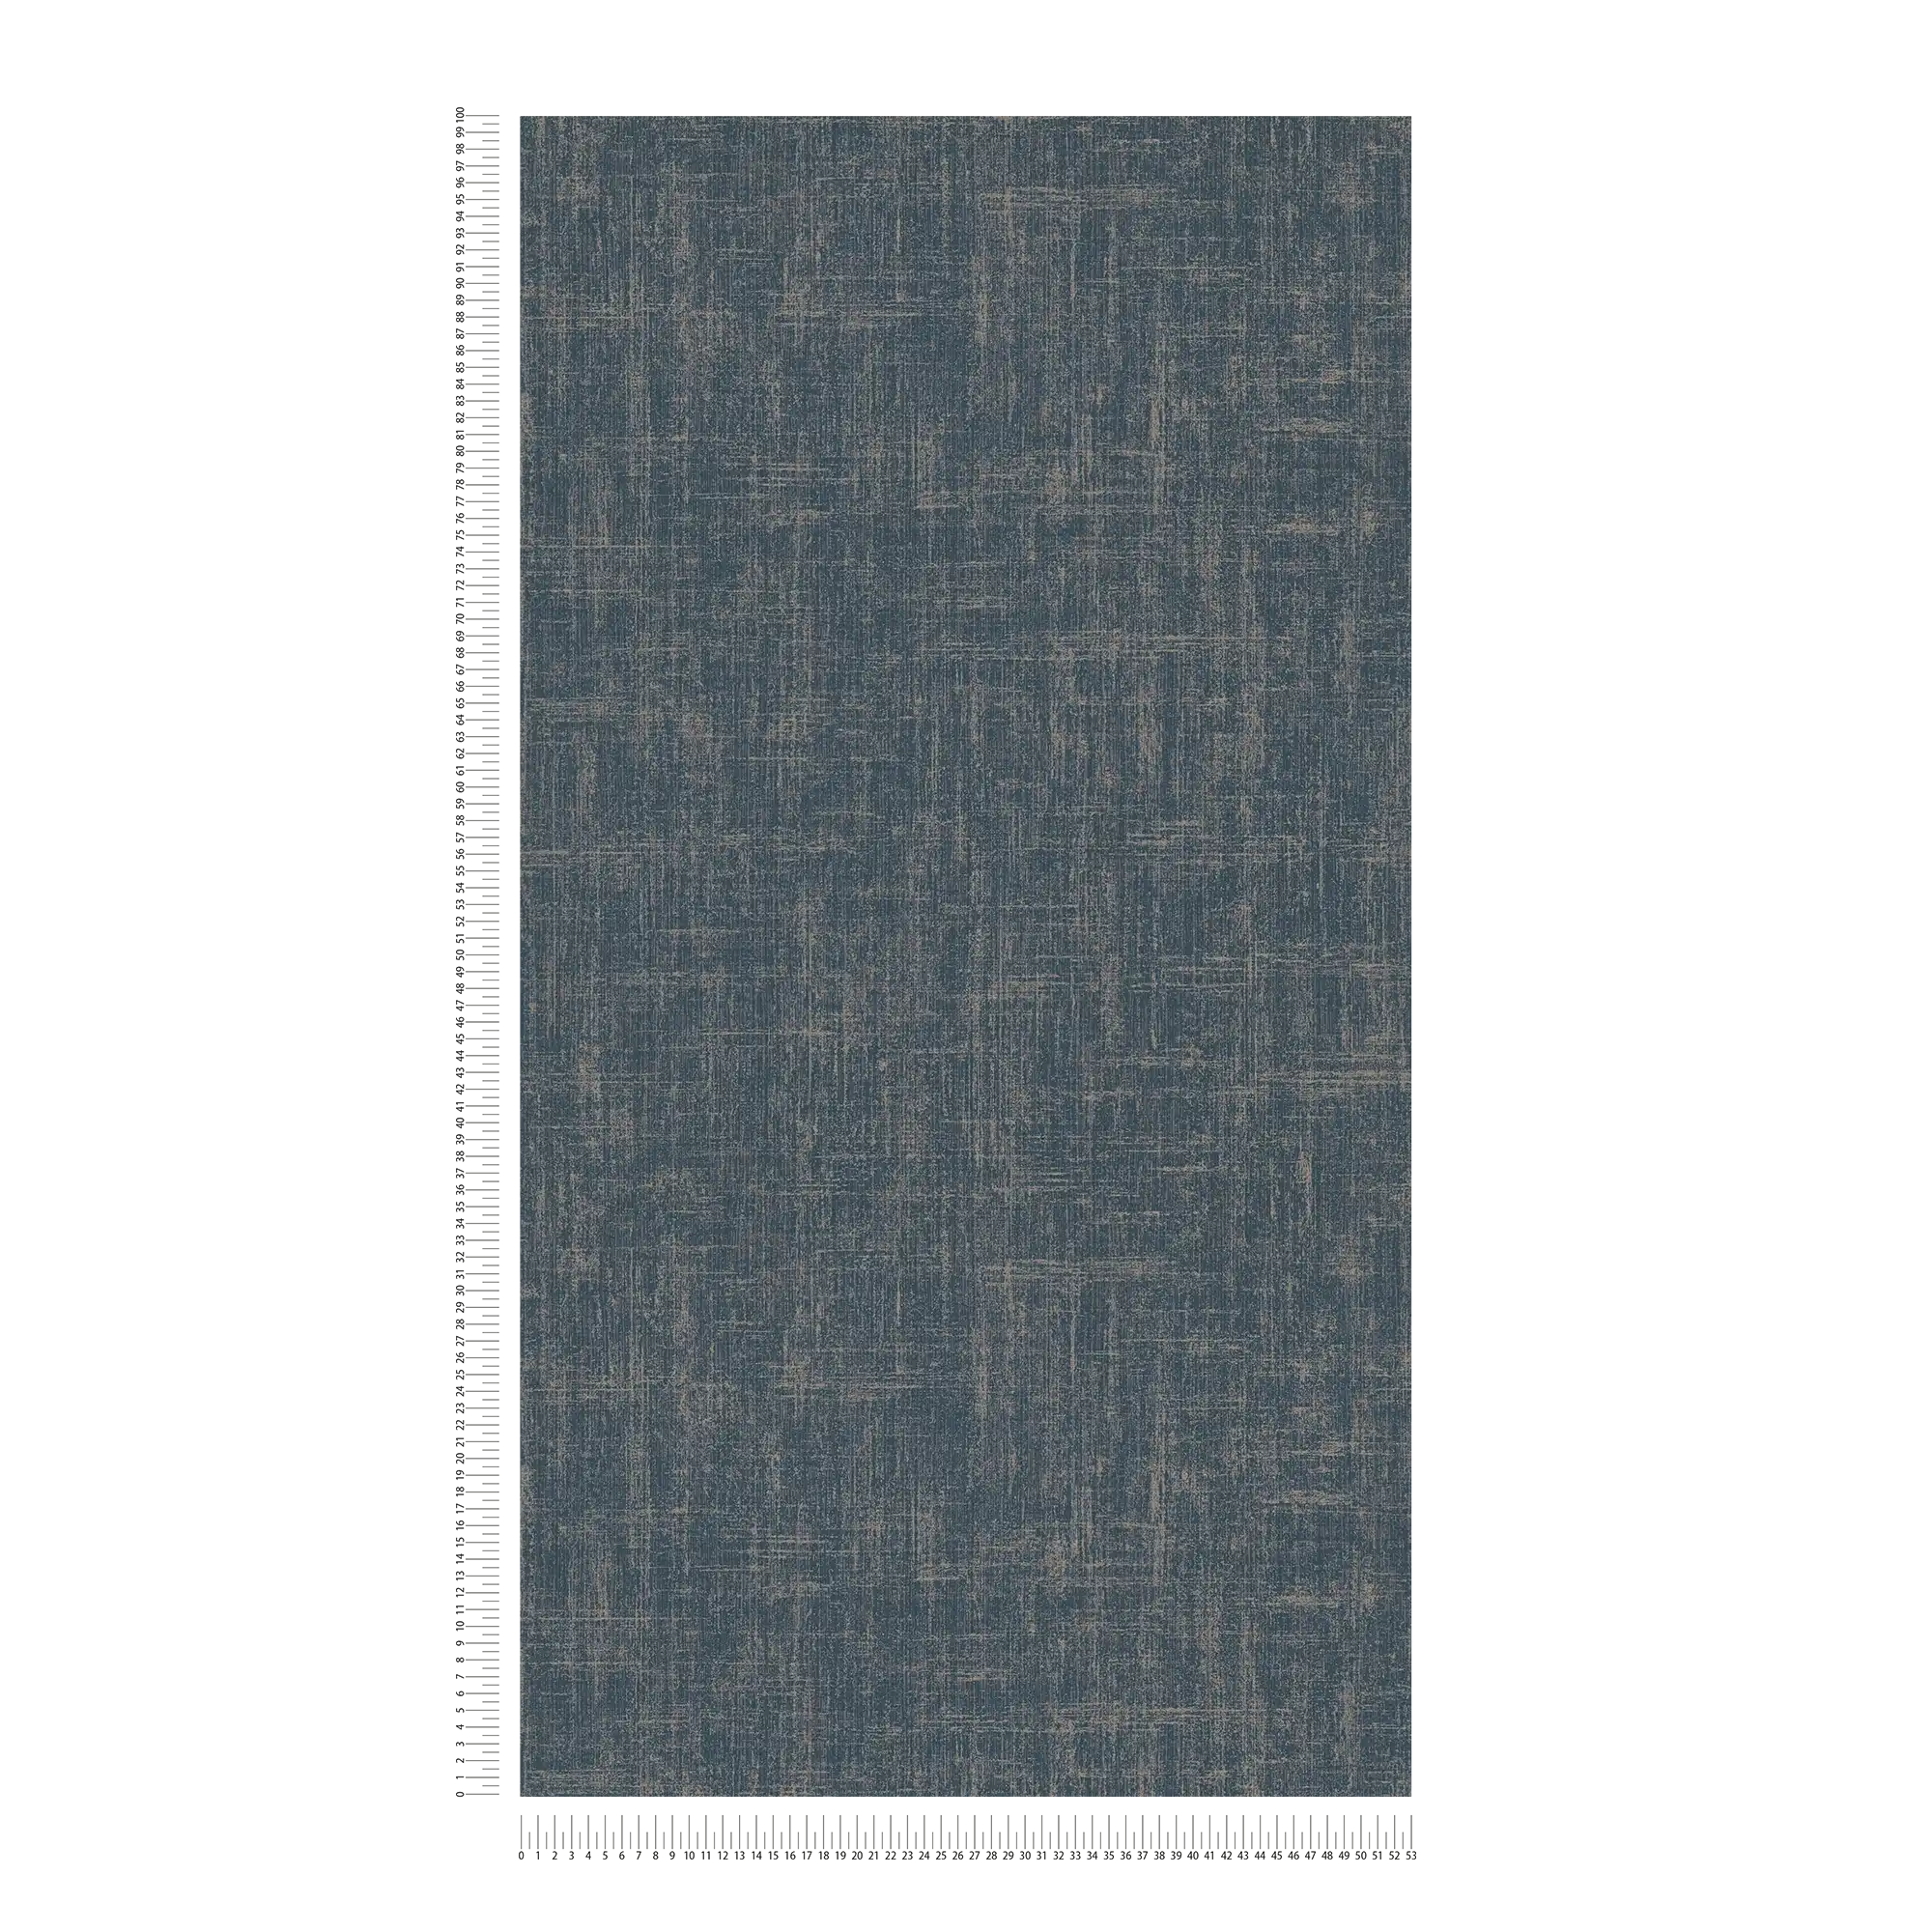             Navy blue wallpaper with metallic accent - blue
        